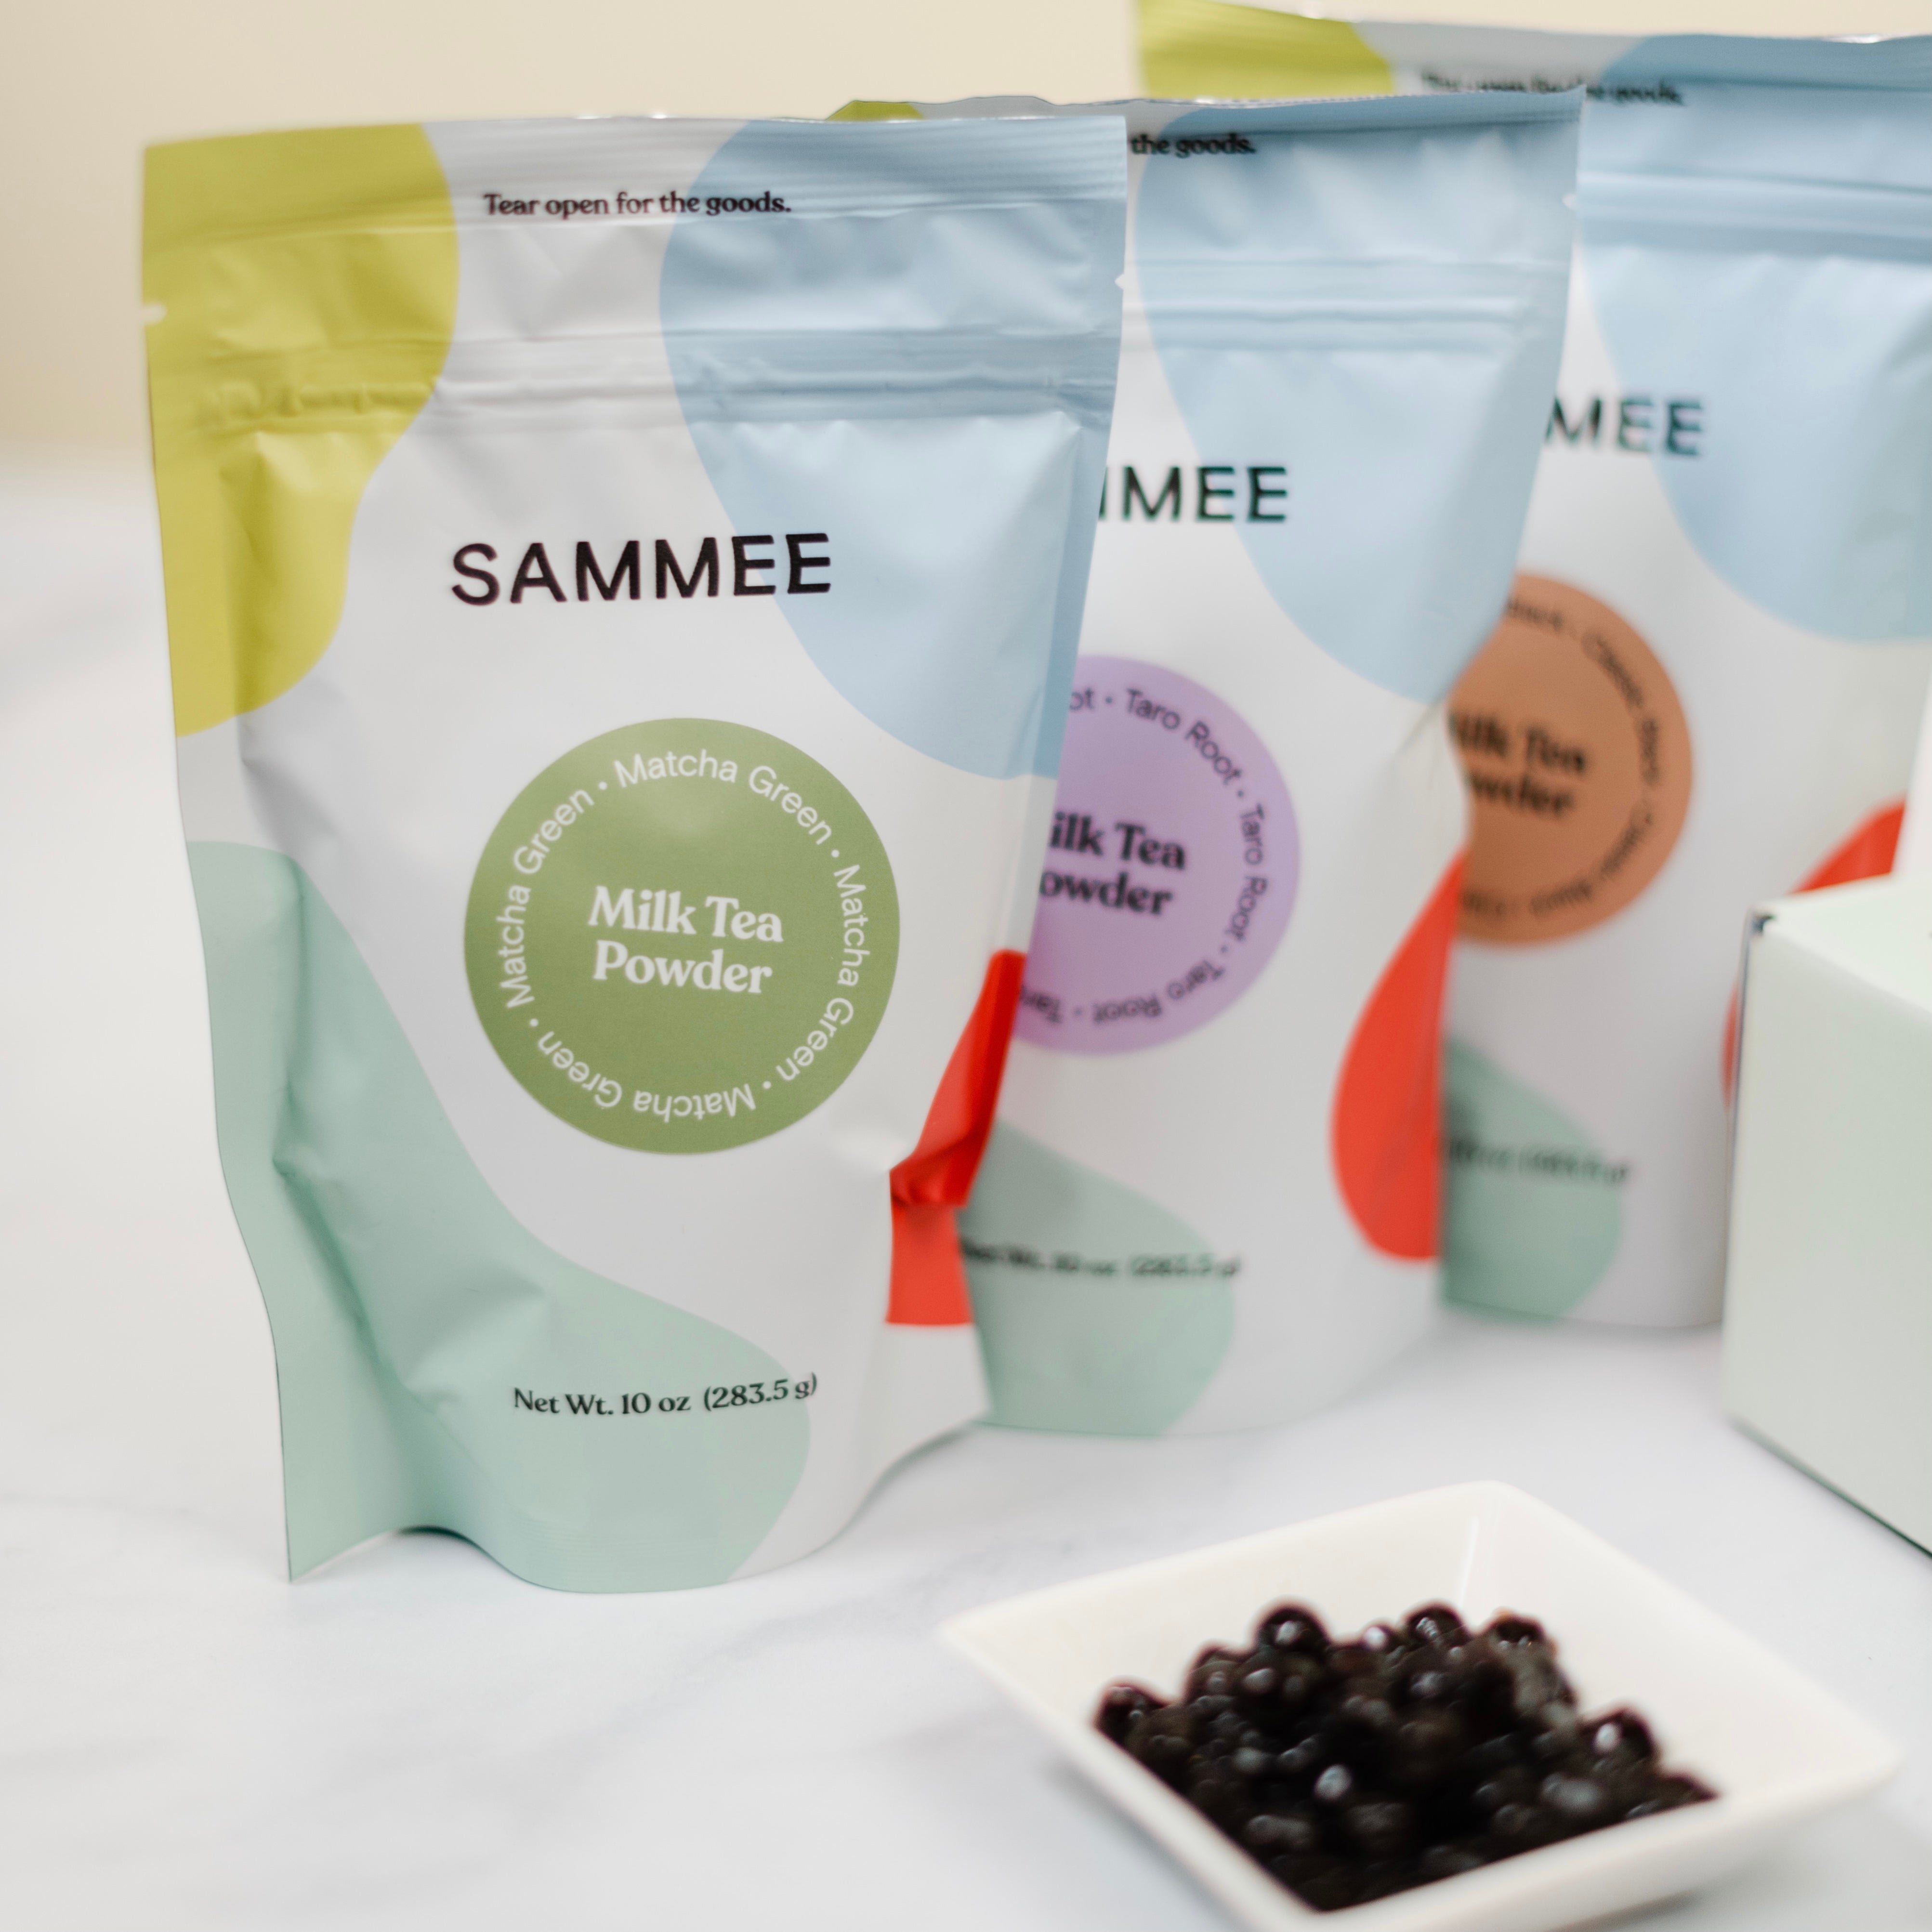 Photo of Milk Tea Powder from SAMMEE with Boba